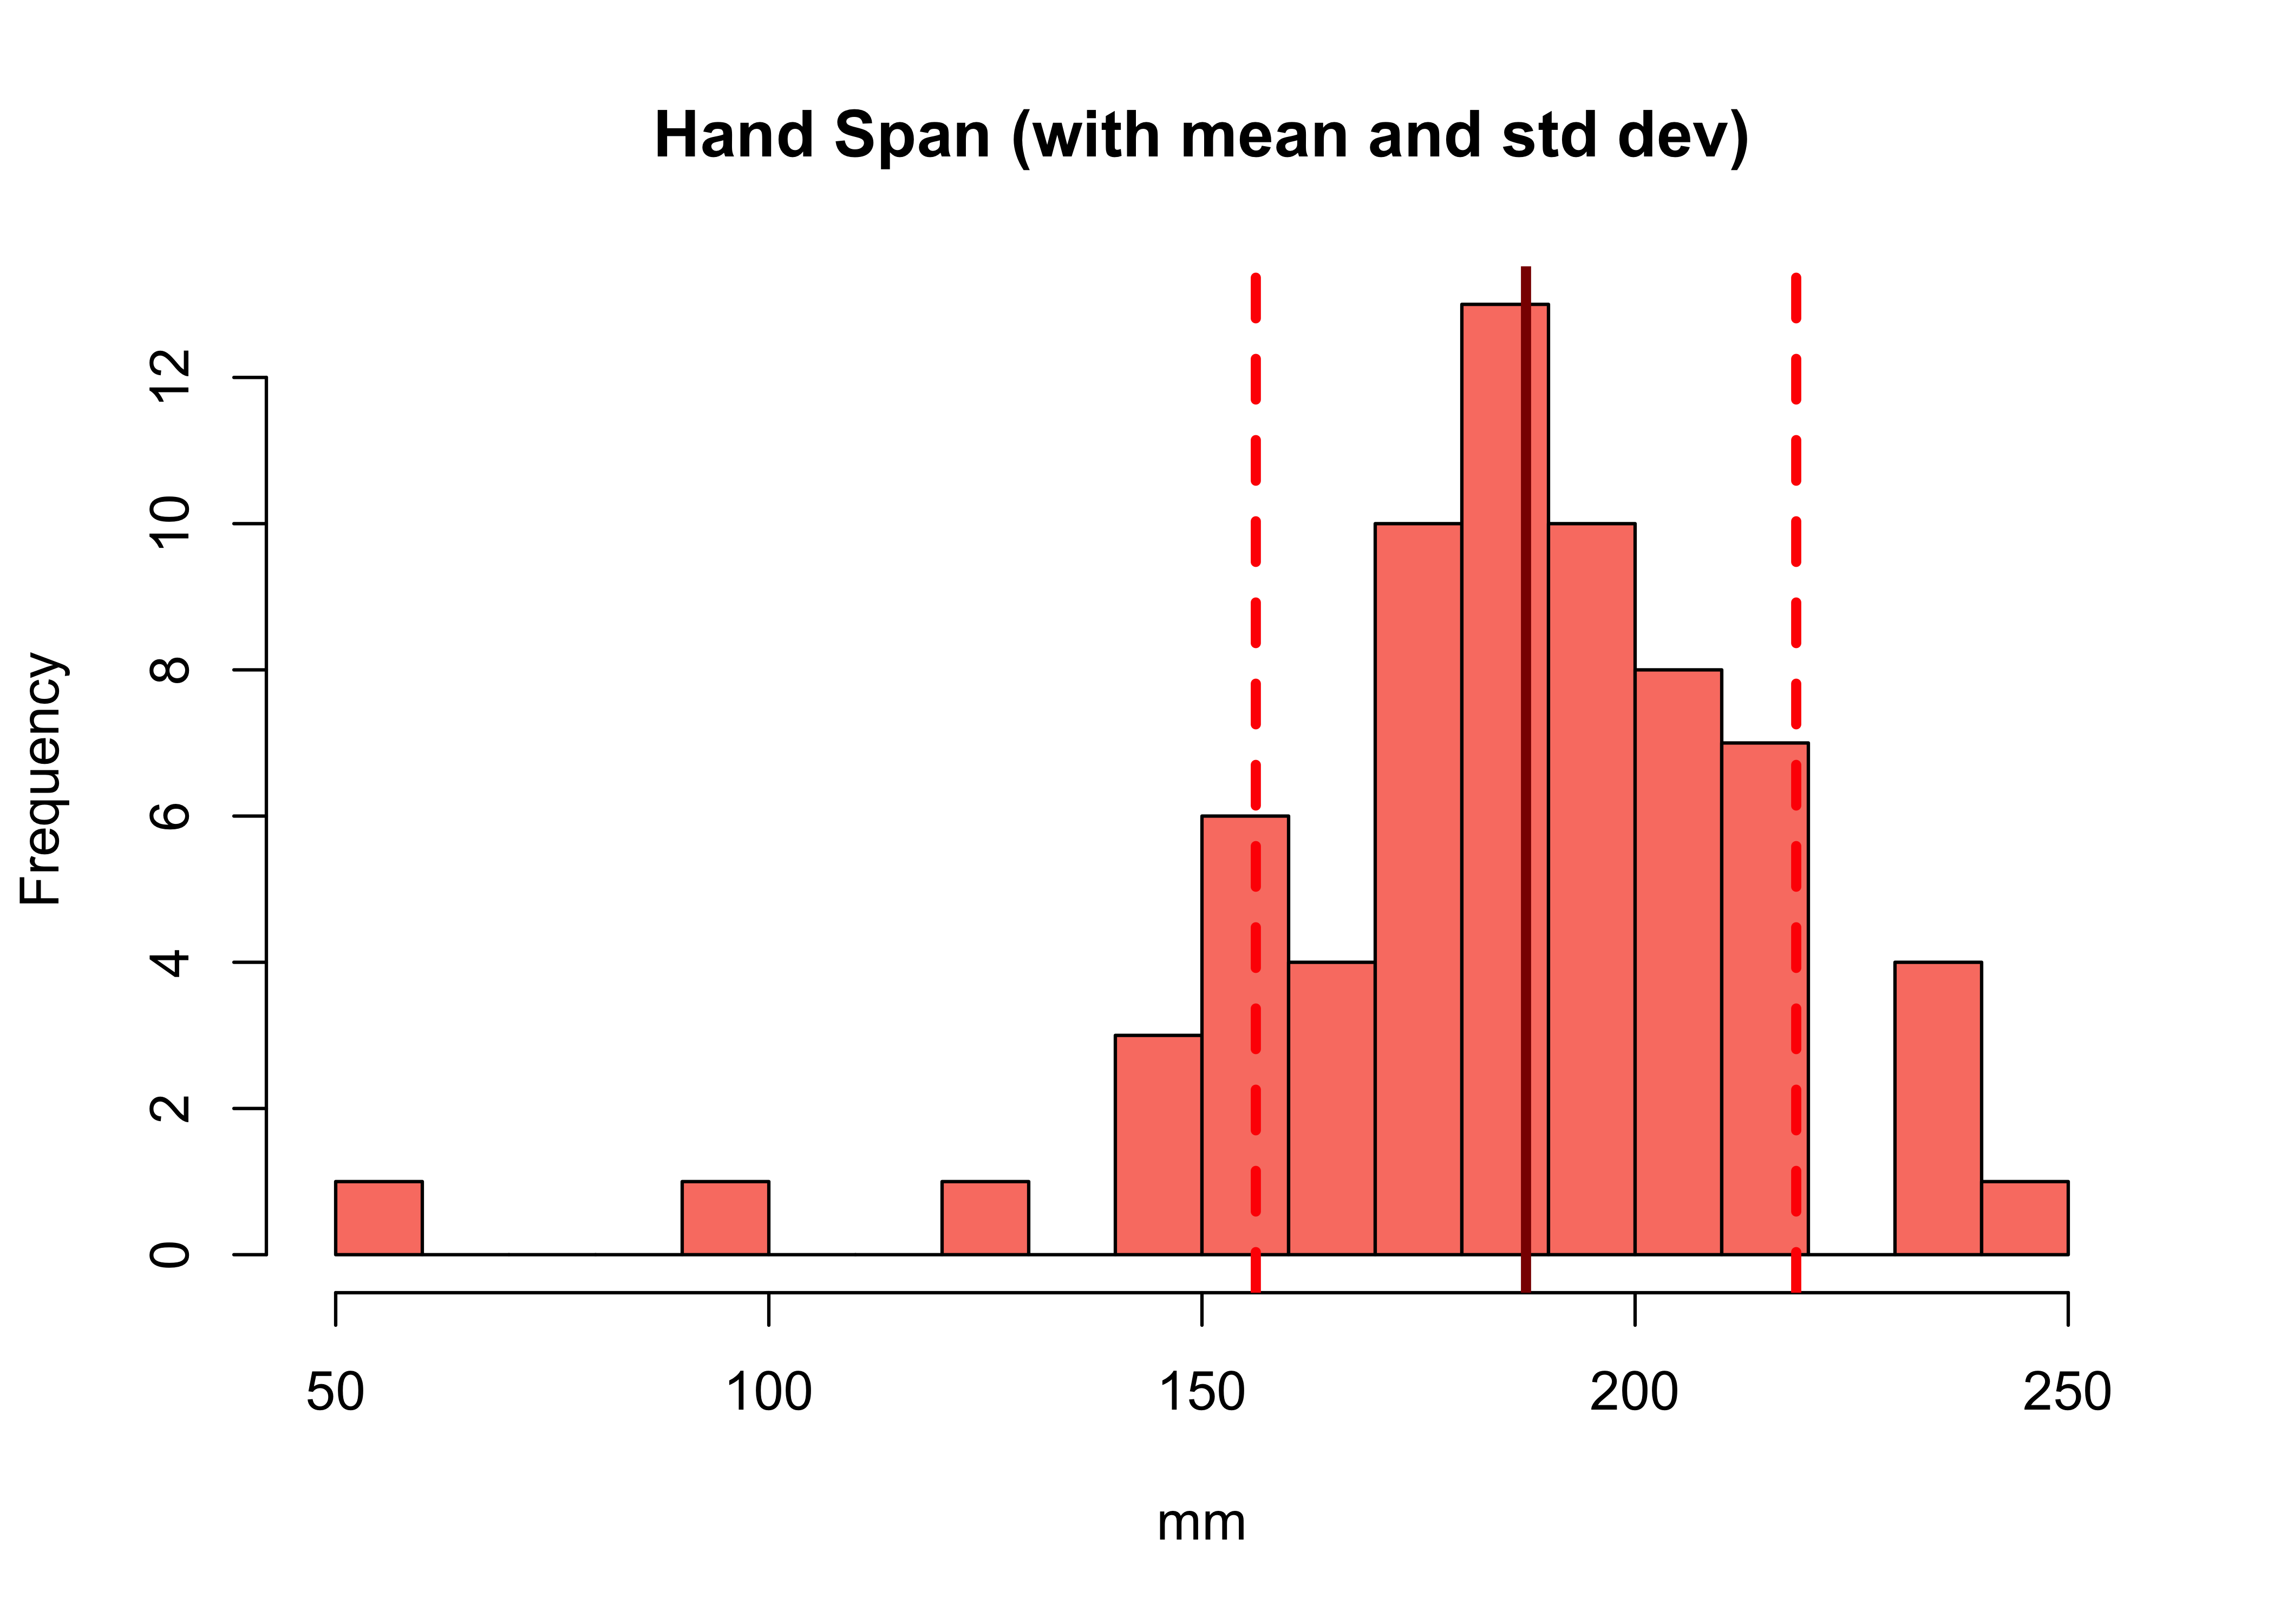 A histogram with the mean (solid line) and standard deviation (dashed lines).